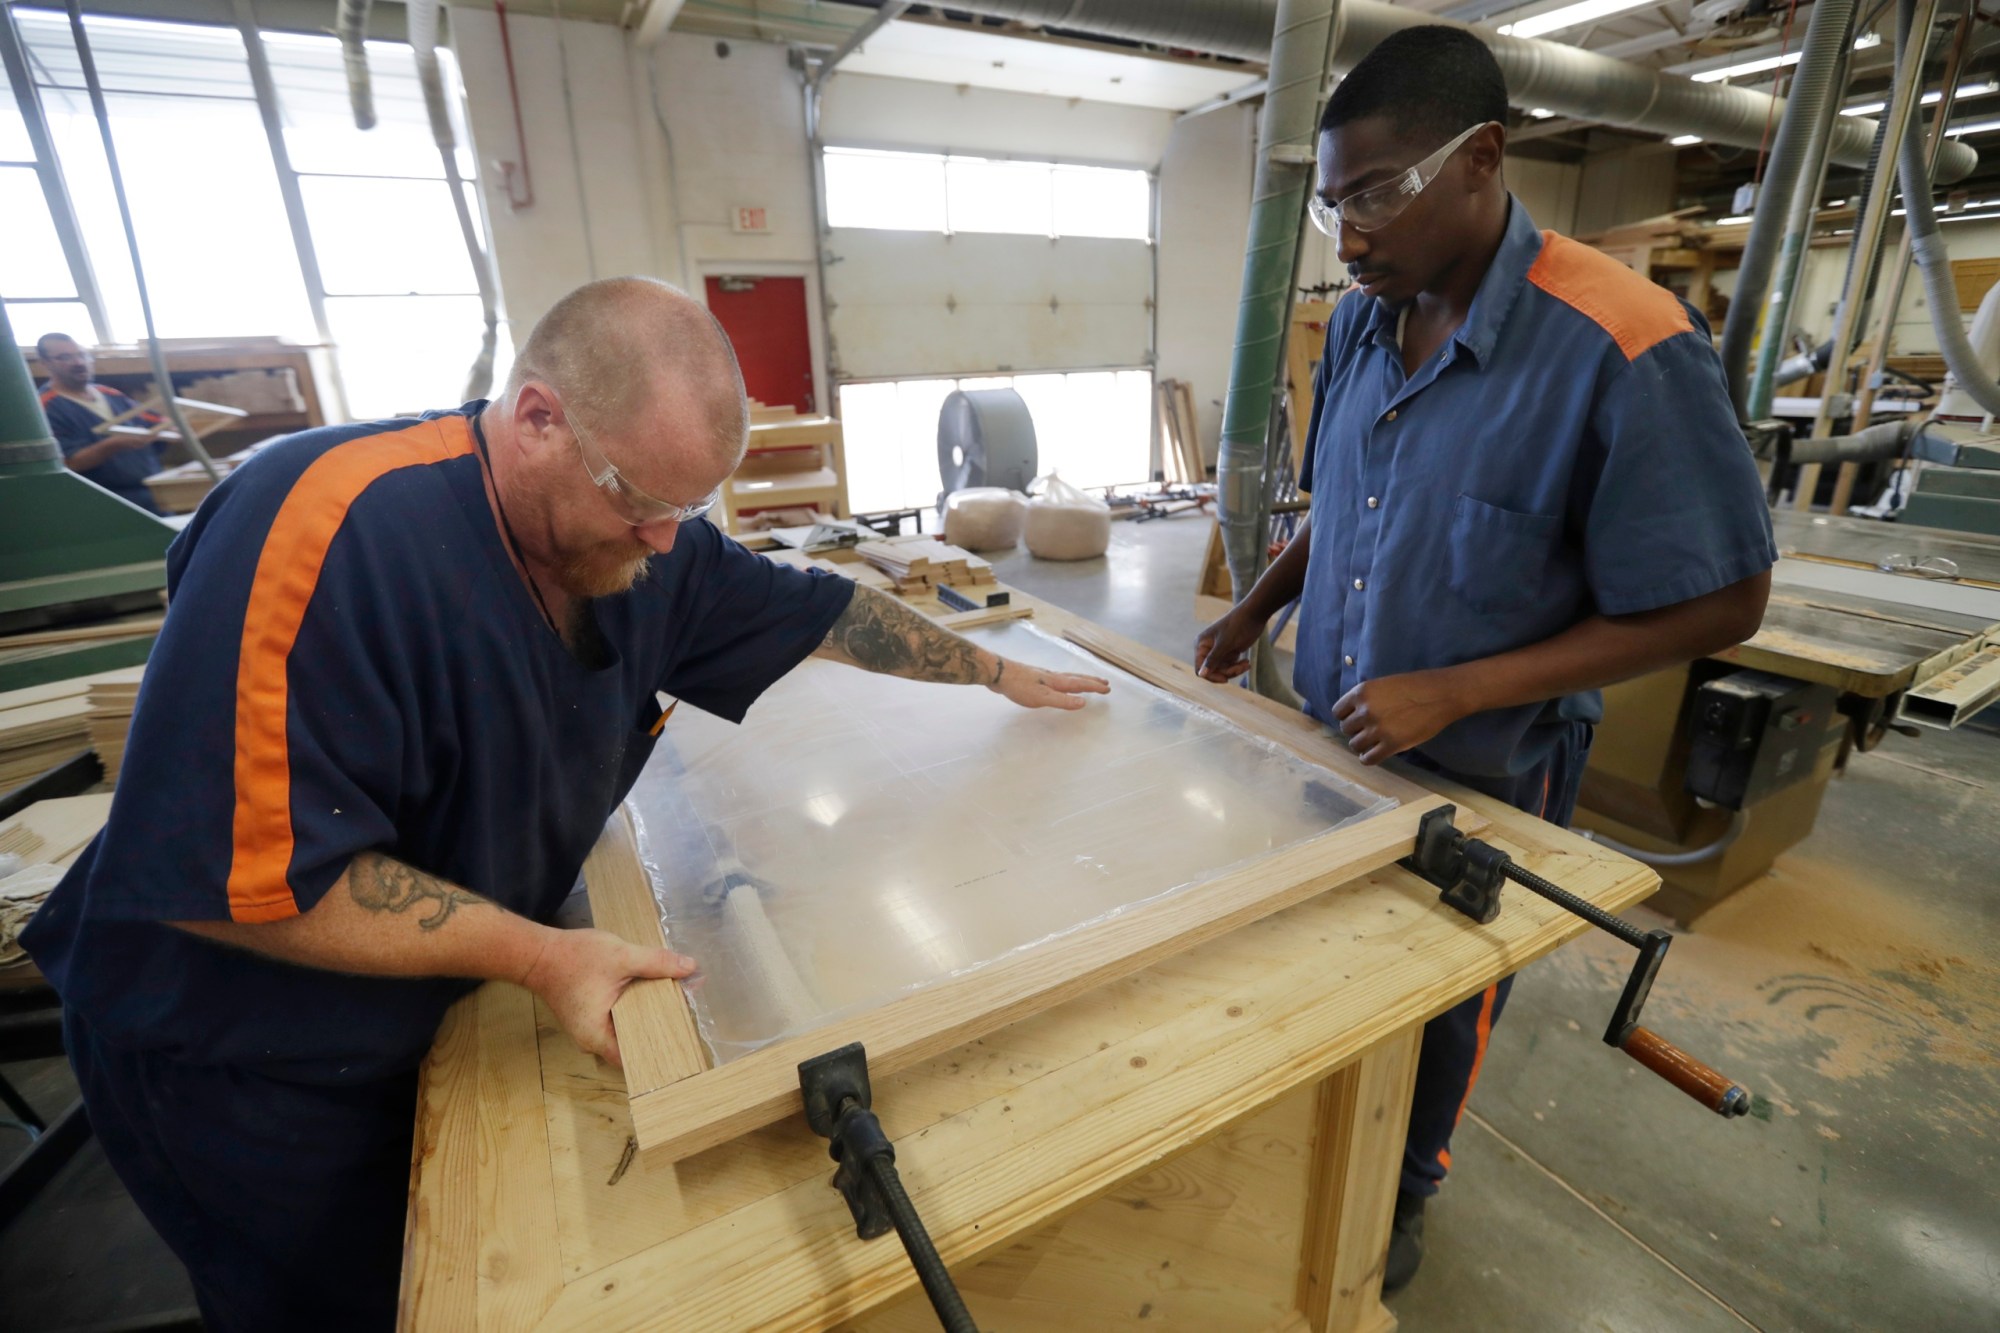 In a photo from Friday, July 8, 2016, inmates James Fletcher, left, and DeAndre Allen work on cabinet doors at the Habitat for Humanity Prison Build at the Ionia Correctional Facility in Ionia, Mich. Few states have been more aggressive in releasing inmates and diverting offenders than Michigan, where the prison system has long threatened the state???s capacity to fund universities and other basics of government. But the $2 billion annual cost remains steep, exacerbated by a boomerang found here and across the country: the large number of inmates who wind up back behind bars again. Now Michigan leaders, frustrated that their downsizing efforts have hit a wall, are trying novel, more hands-on methods to ensure that prisoners leave with a job in hand. (AP Photo/Carlos Osorio)